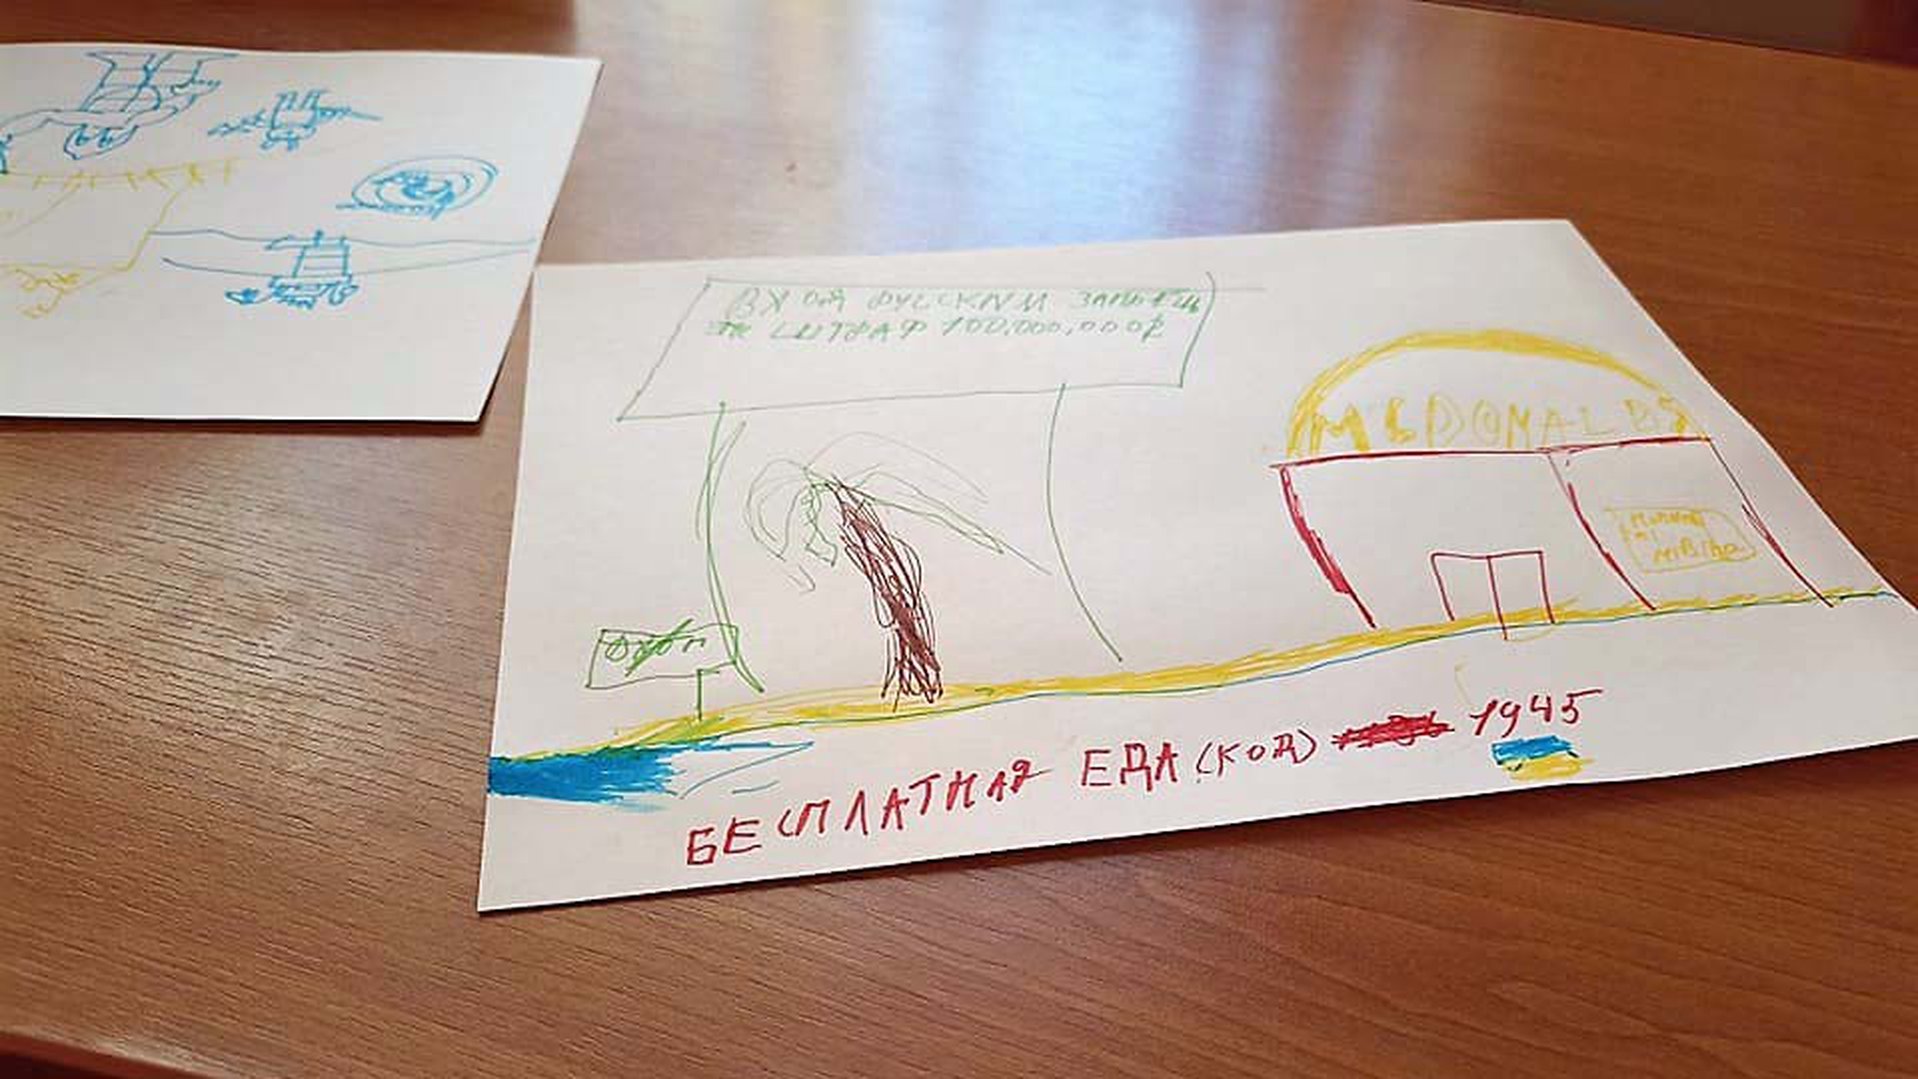 A drawing from a child who fled Ukraine who was asked to draw a house where it feels safe. The drawing is of McDonalds next to a palm tree and water.